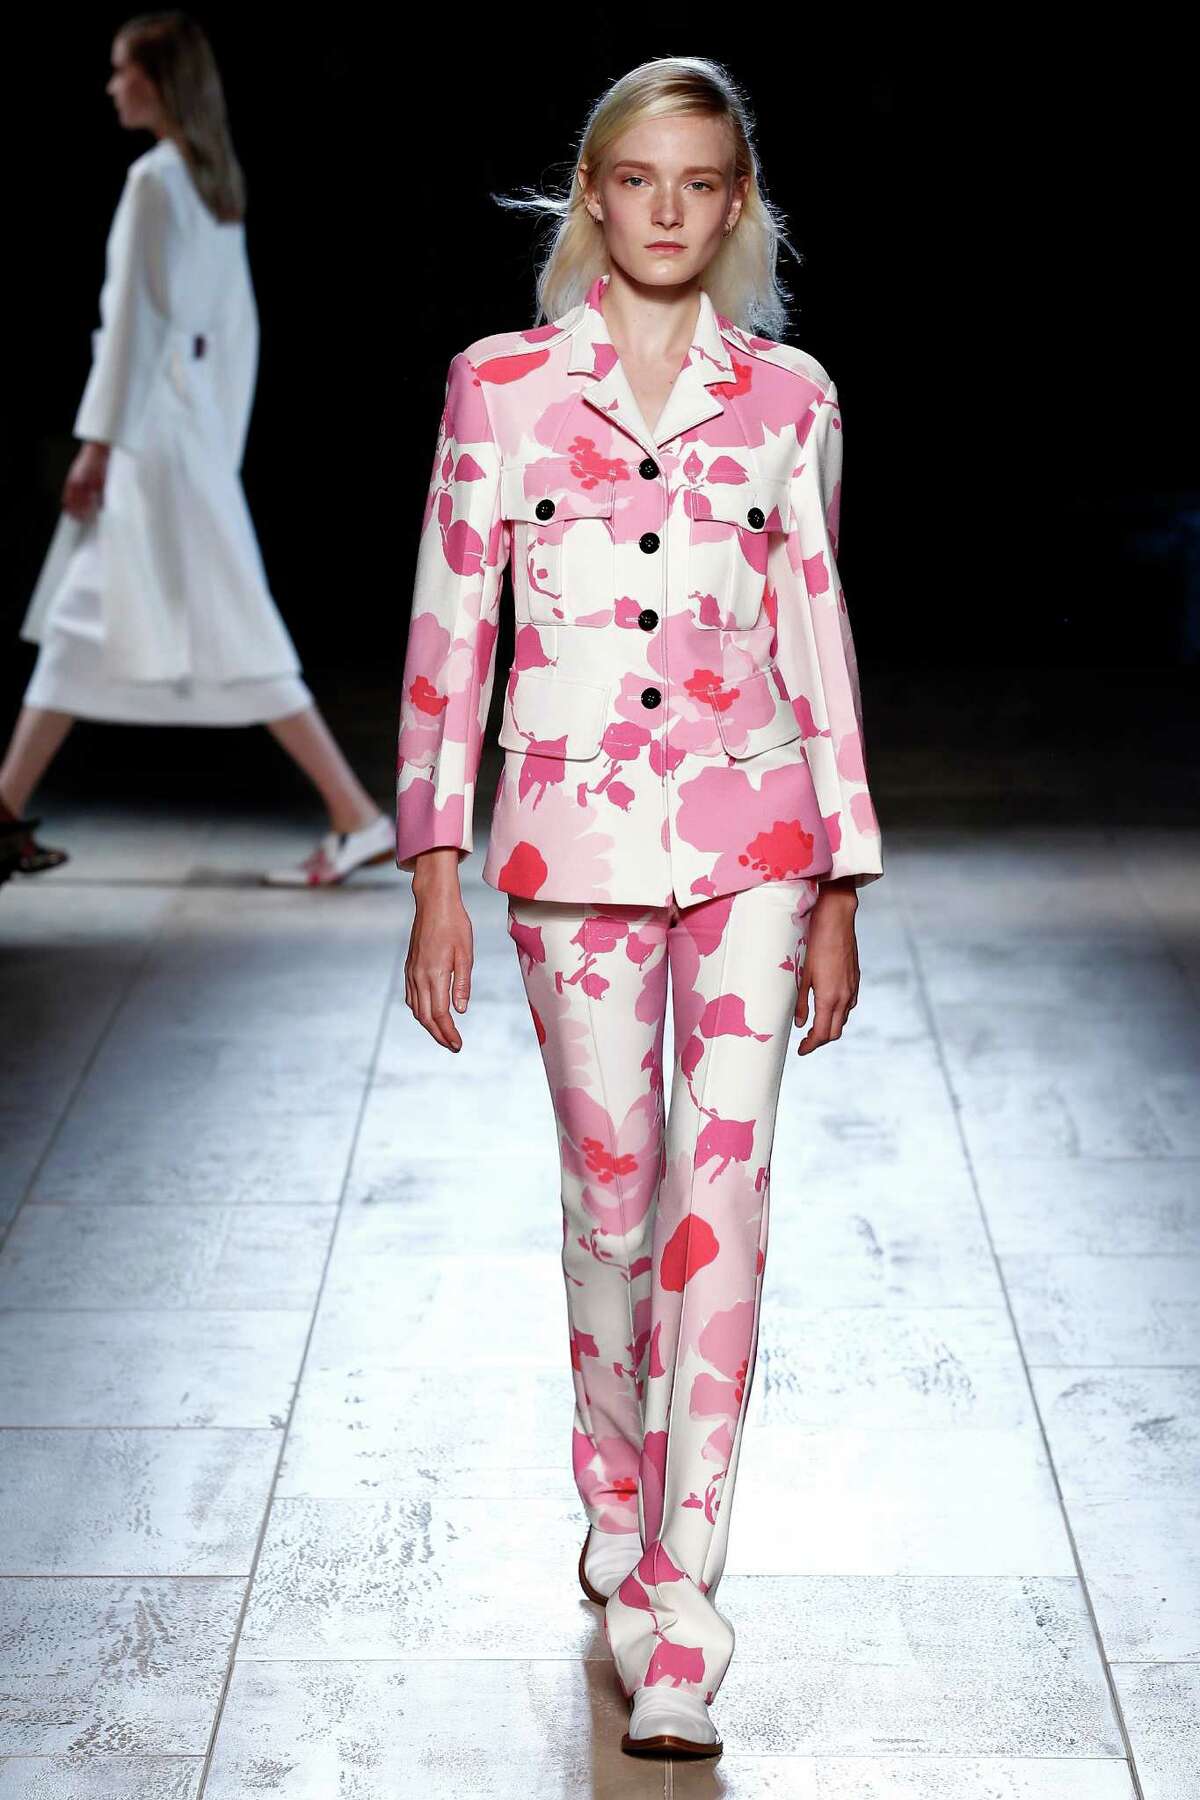 Colorful spring collections bring smiles to the runways